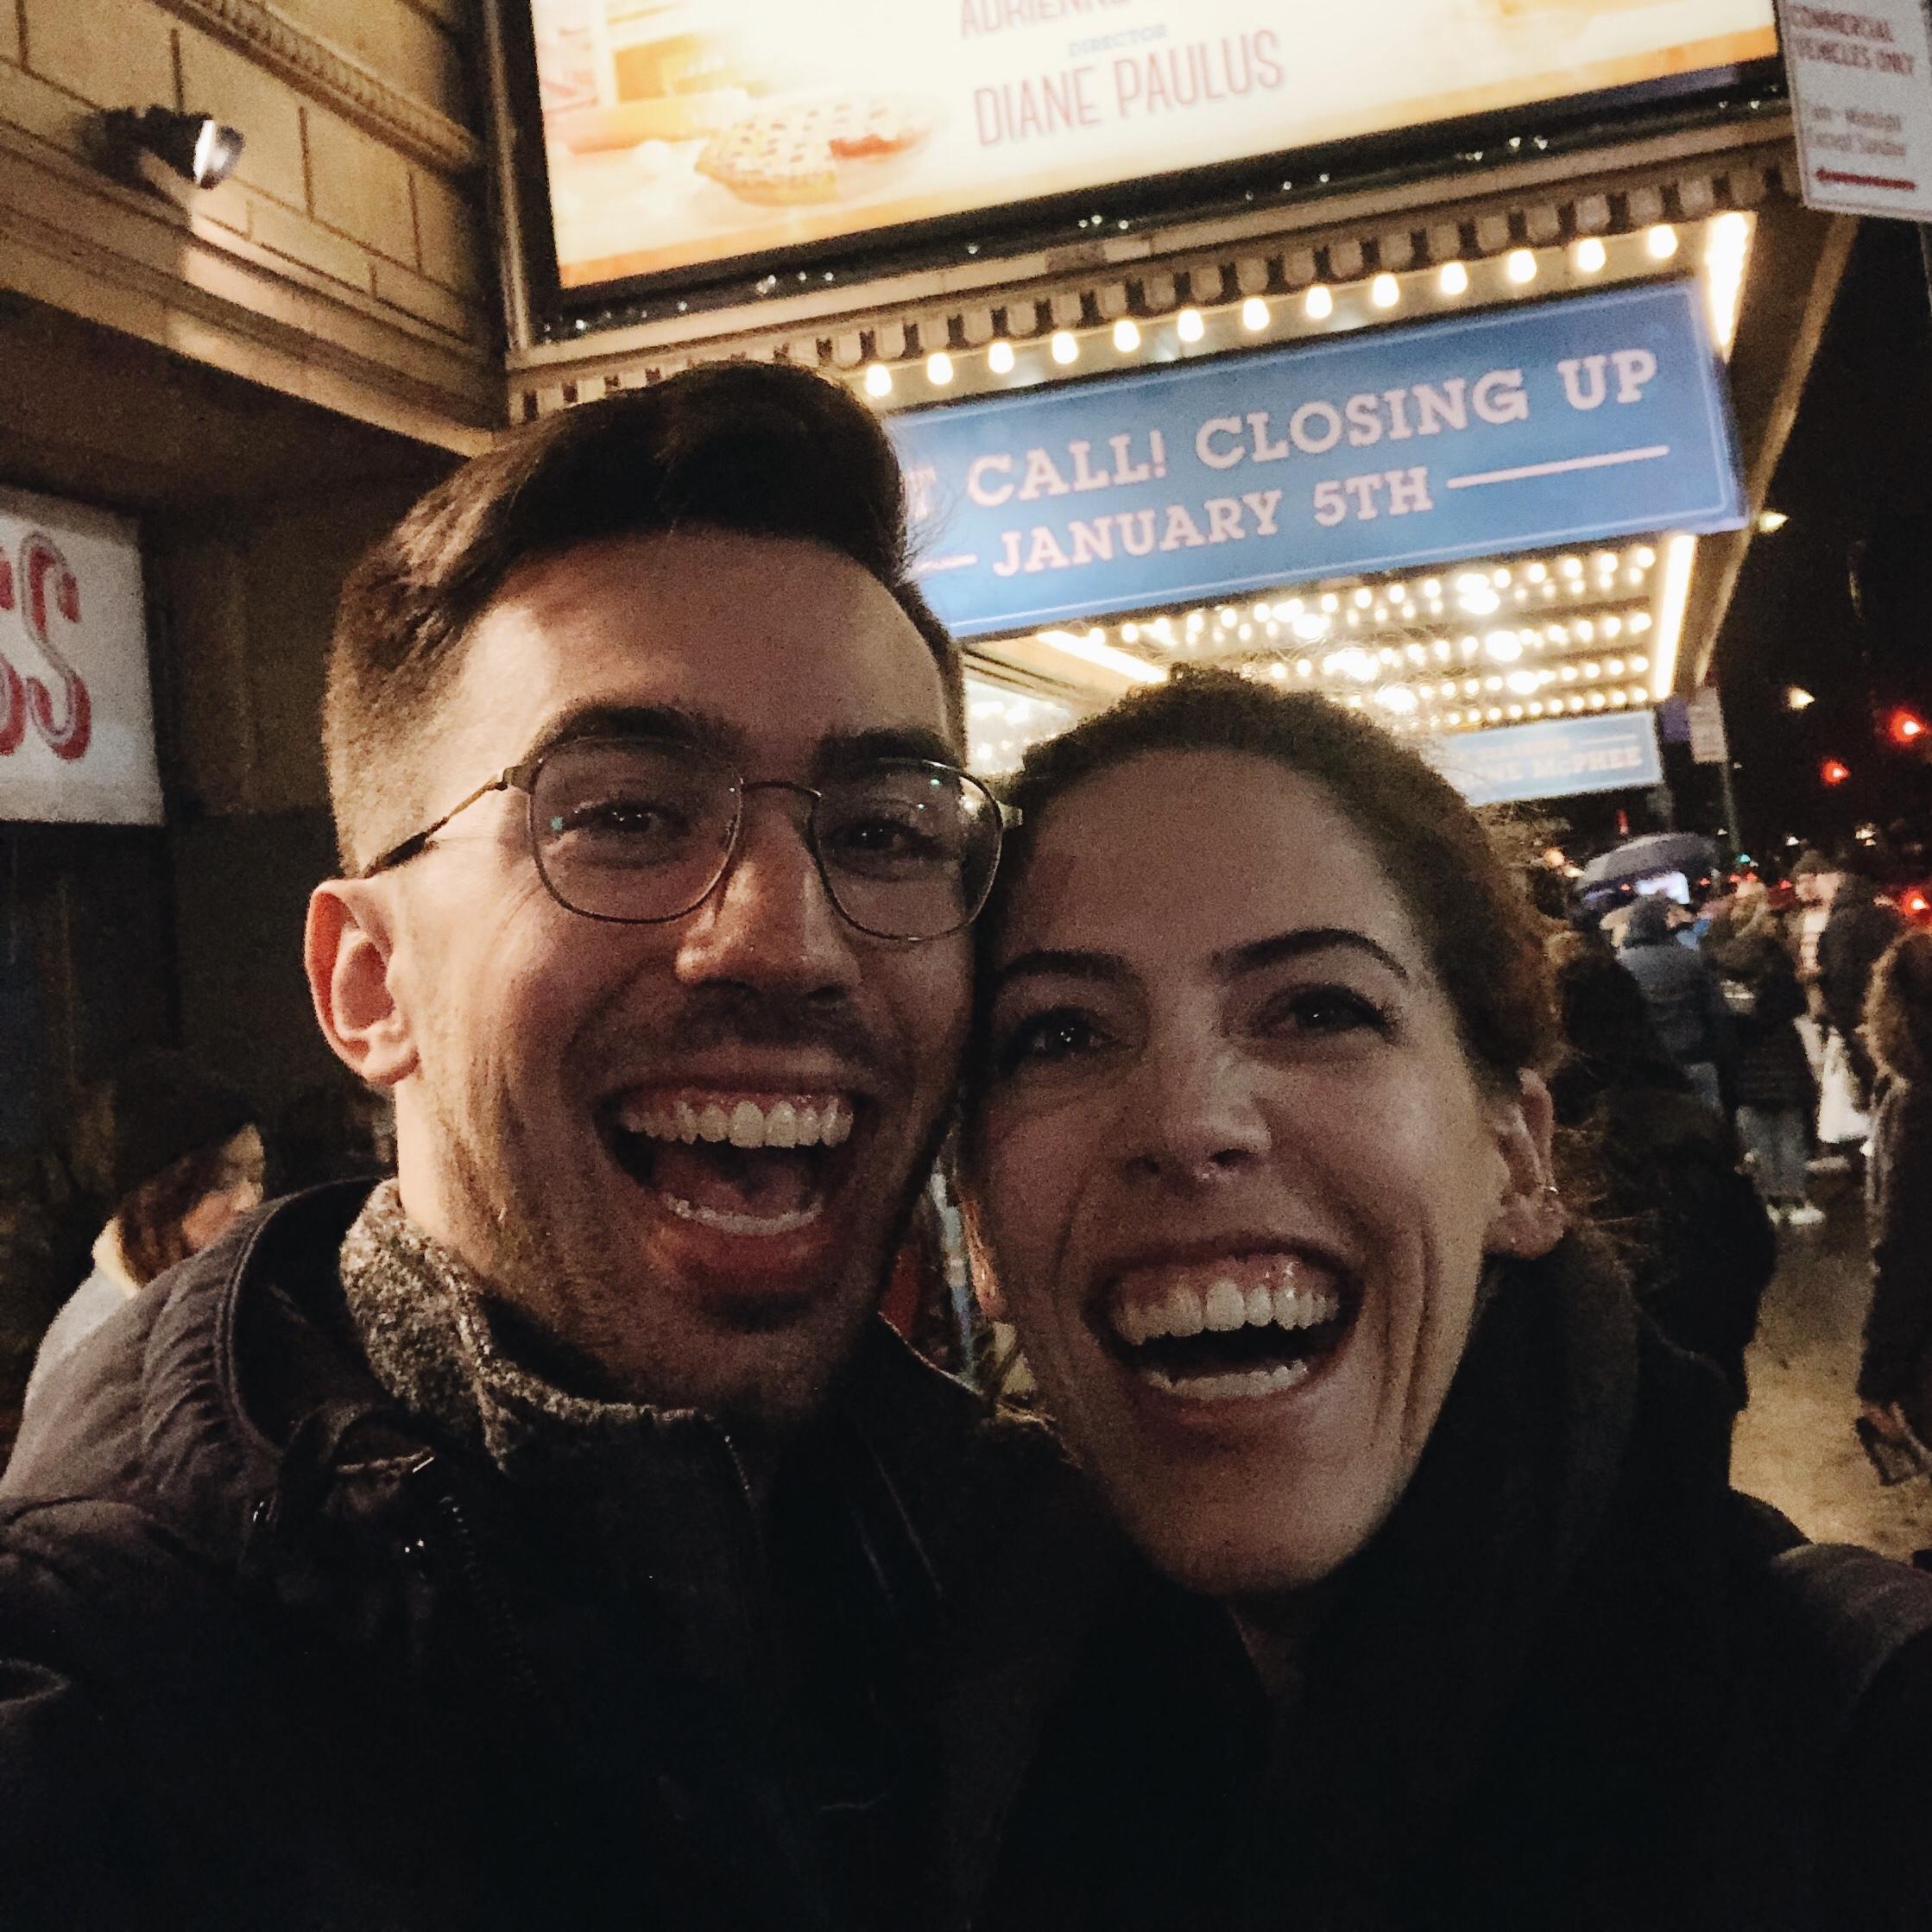 We love Broadway! P.S. The Drew and Kate pose strikes again.